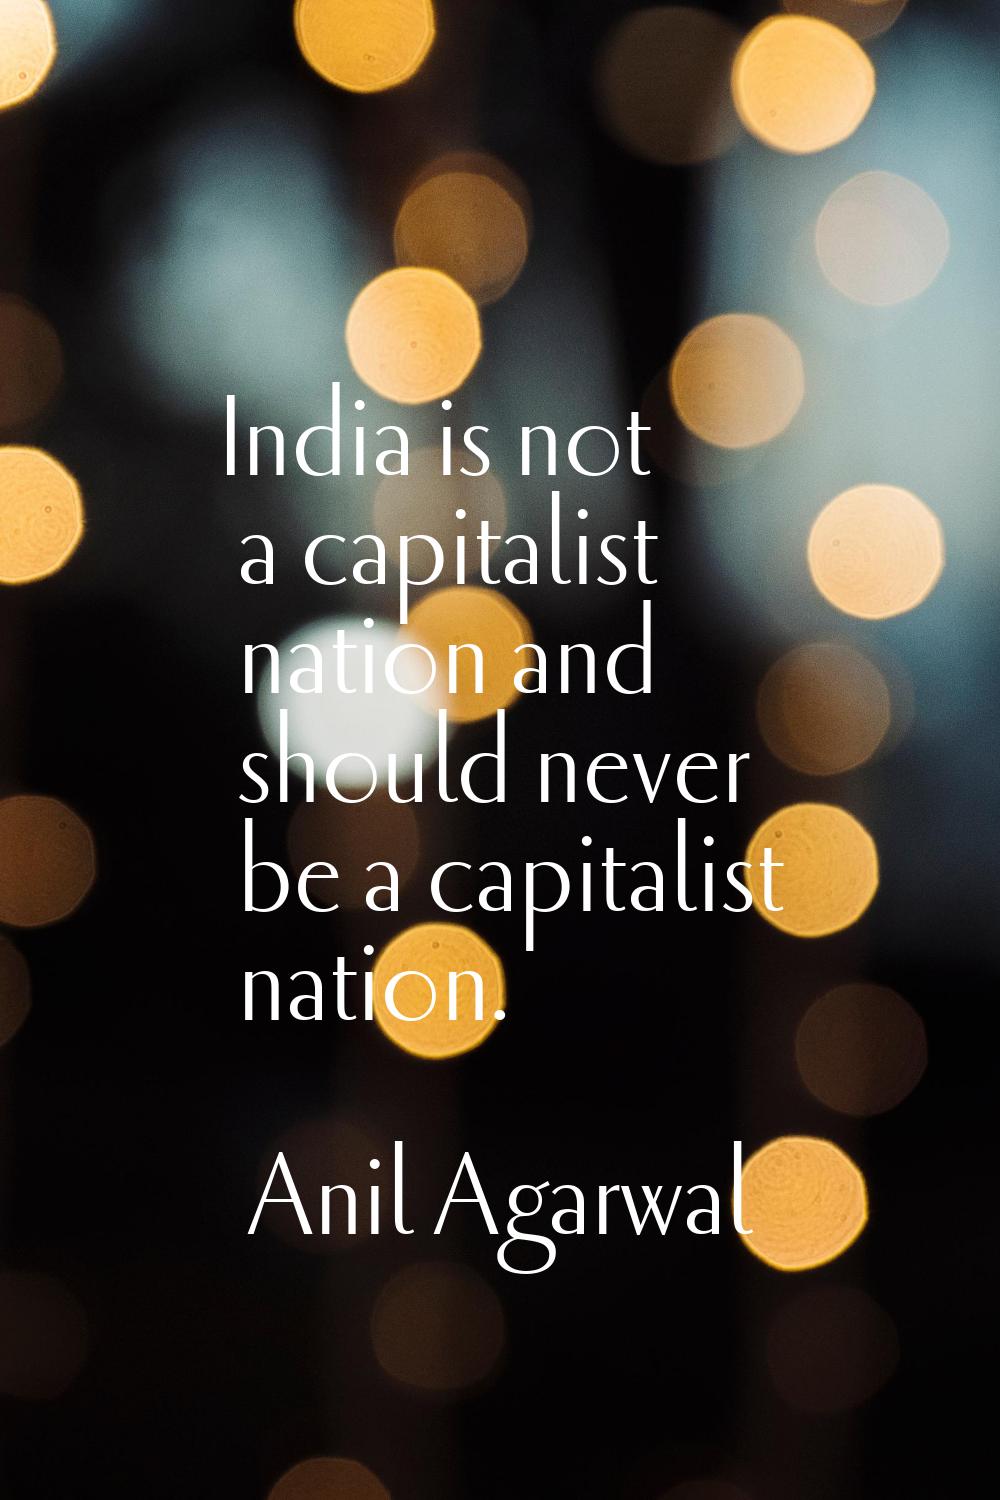 India is not a capitalist nation and should never be a capitalist nation.